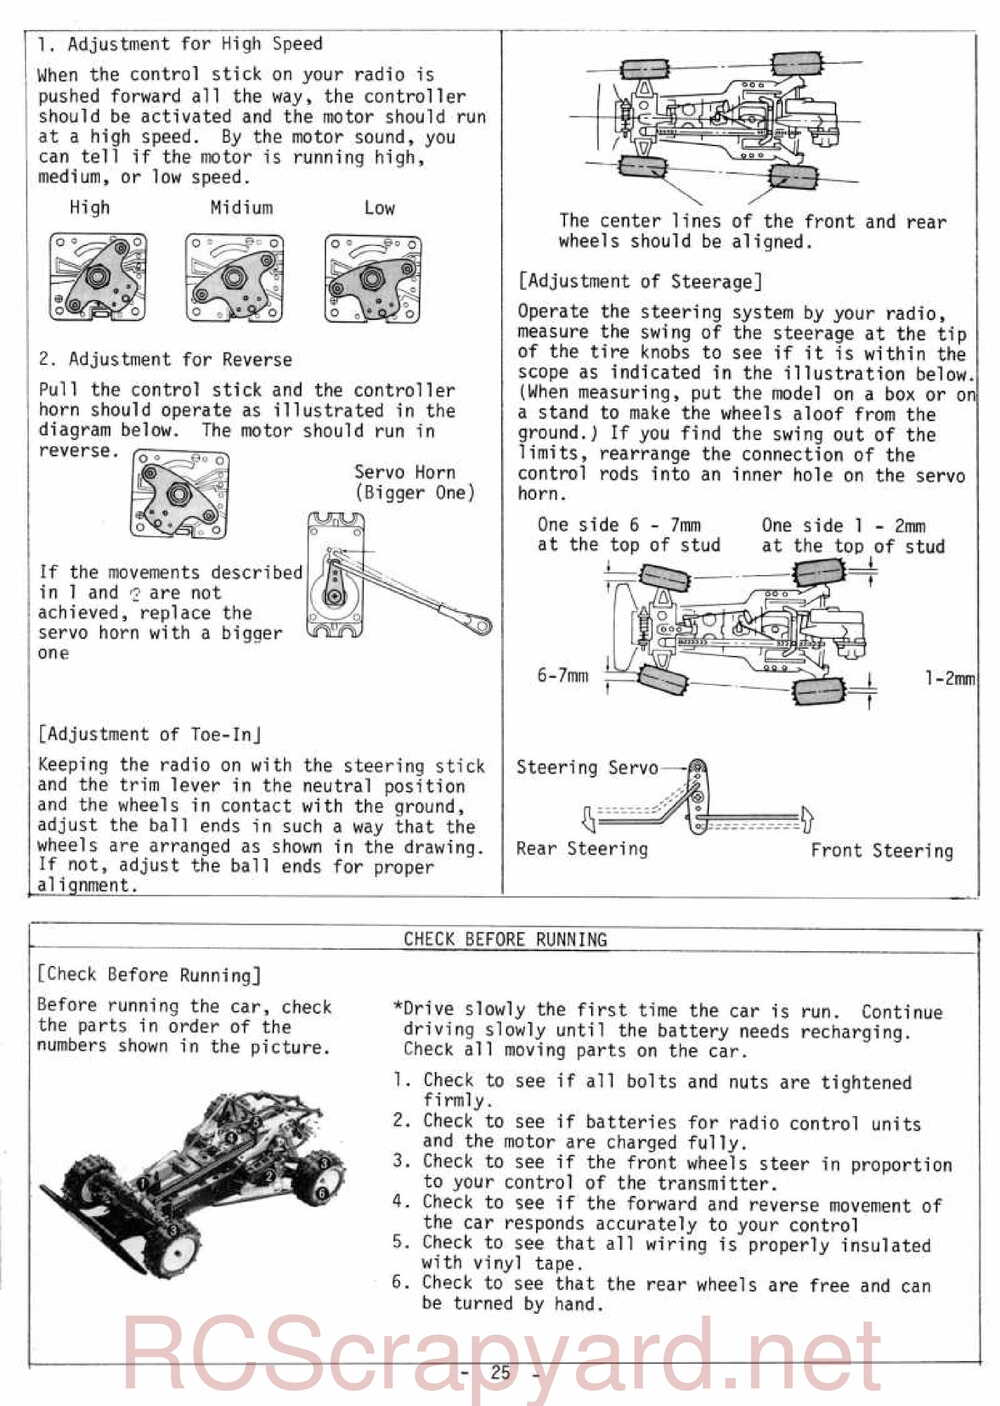 Kyosho - 3069 - Gallop MkII - Manual - Page 25